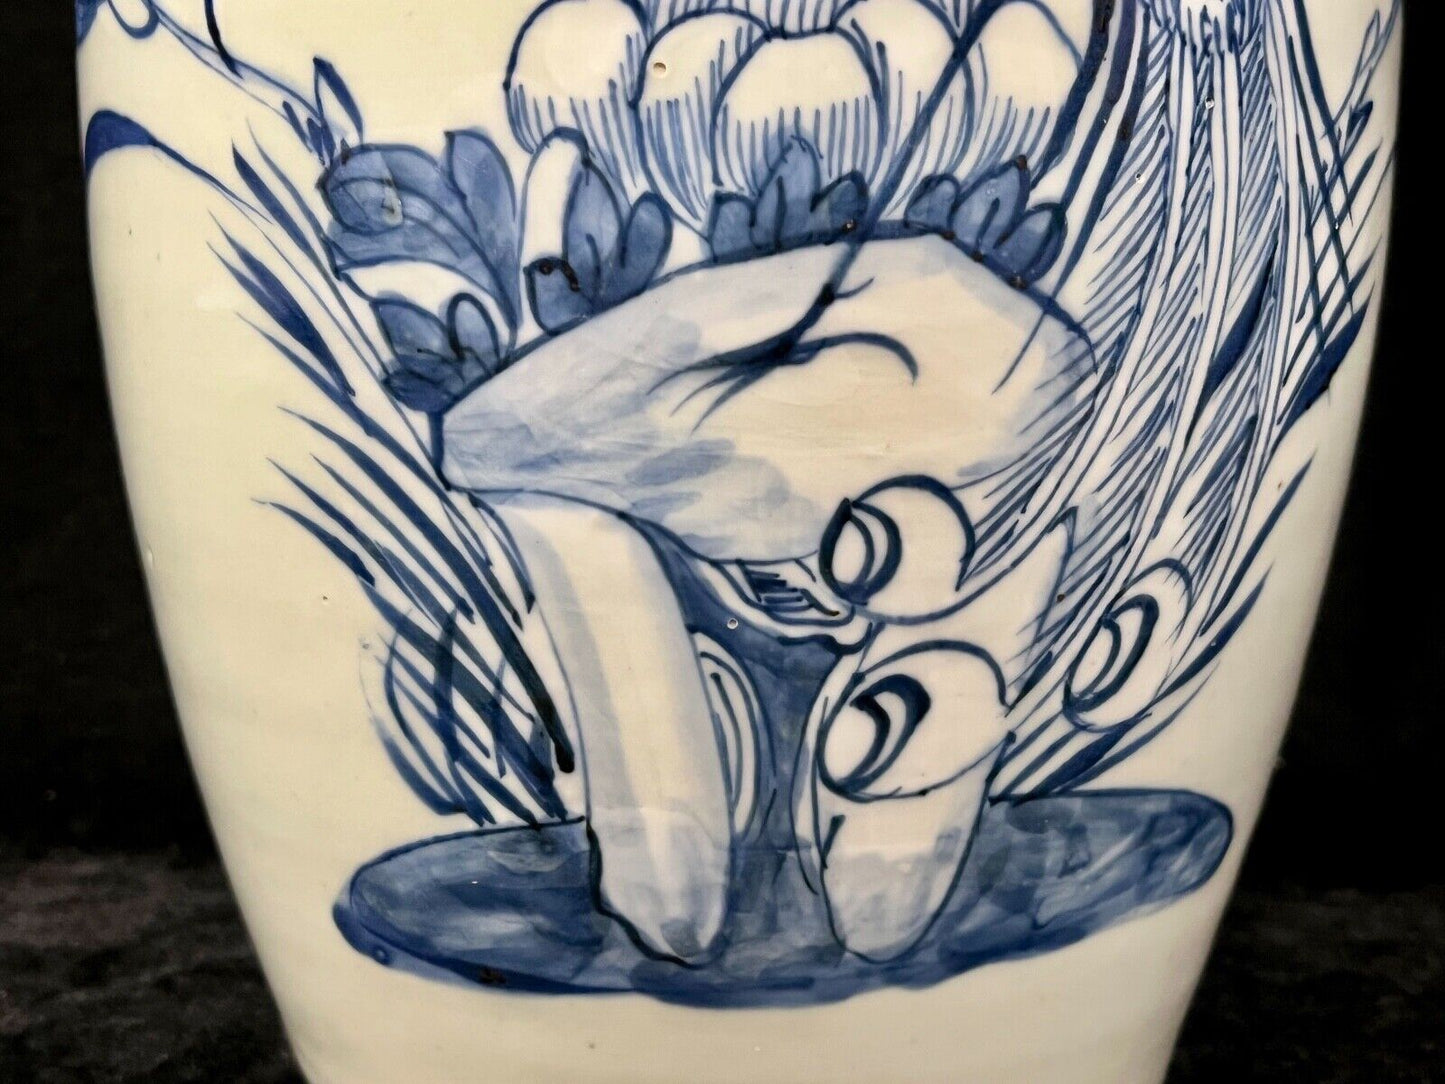 Antique Chinese Qing 19Th Century Blue & White Jar Hand Painted Phoenix 18"